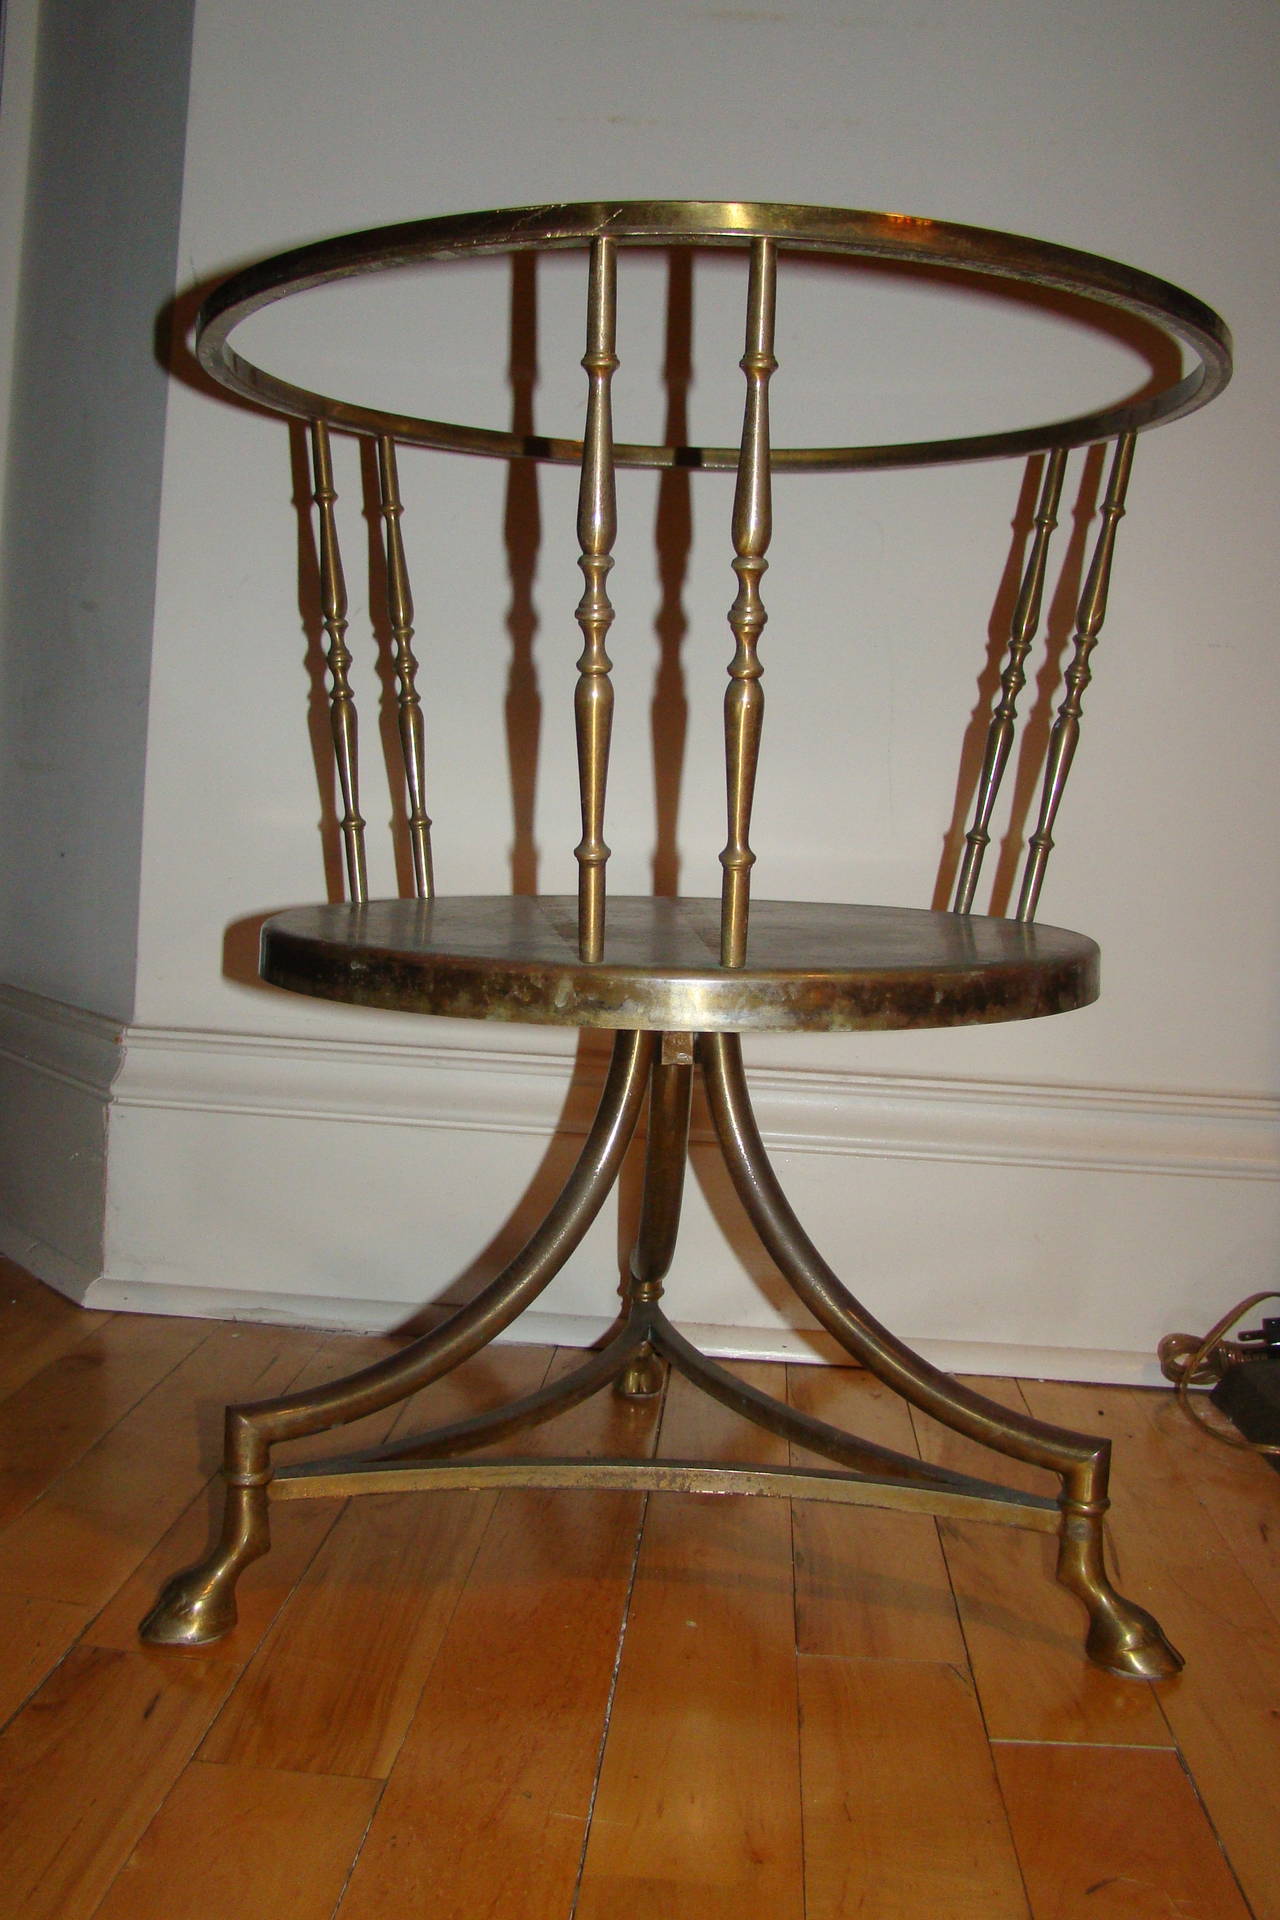 Exceptional Mid-Century Italian Chiavari table. This interesting design is comprised of a sculptural brass frame with hoof foot legs. Glass top not included.